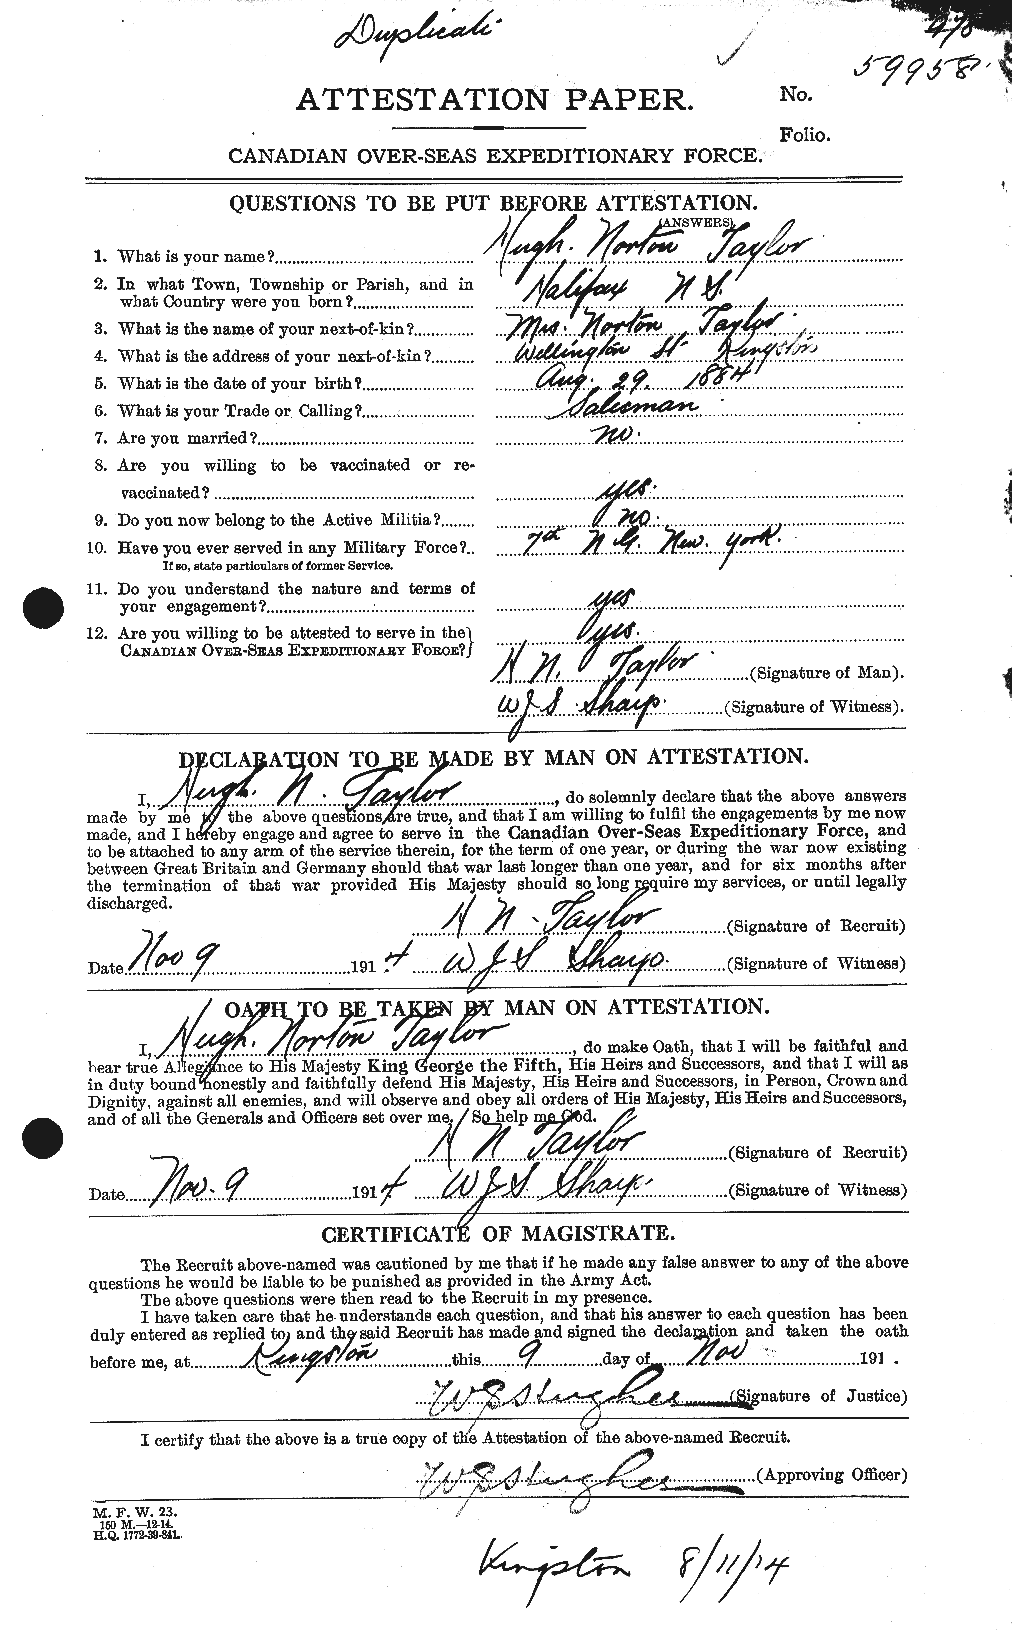 Personnel Records of the First World War - CEF 626620a